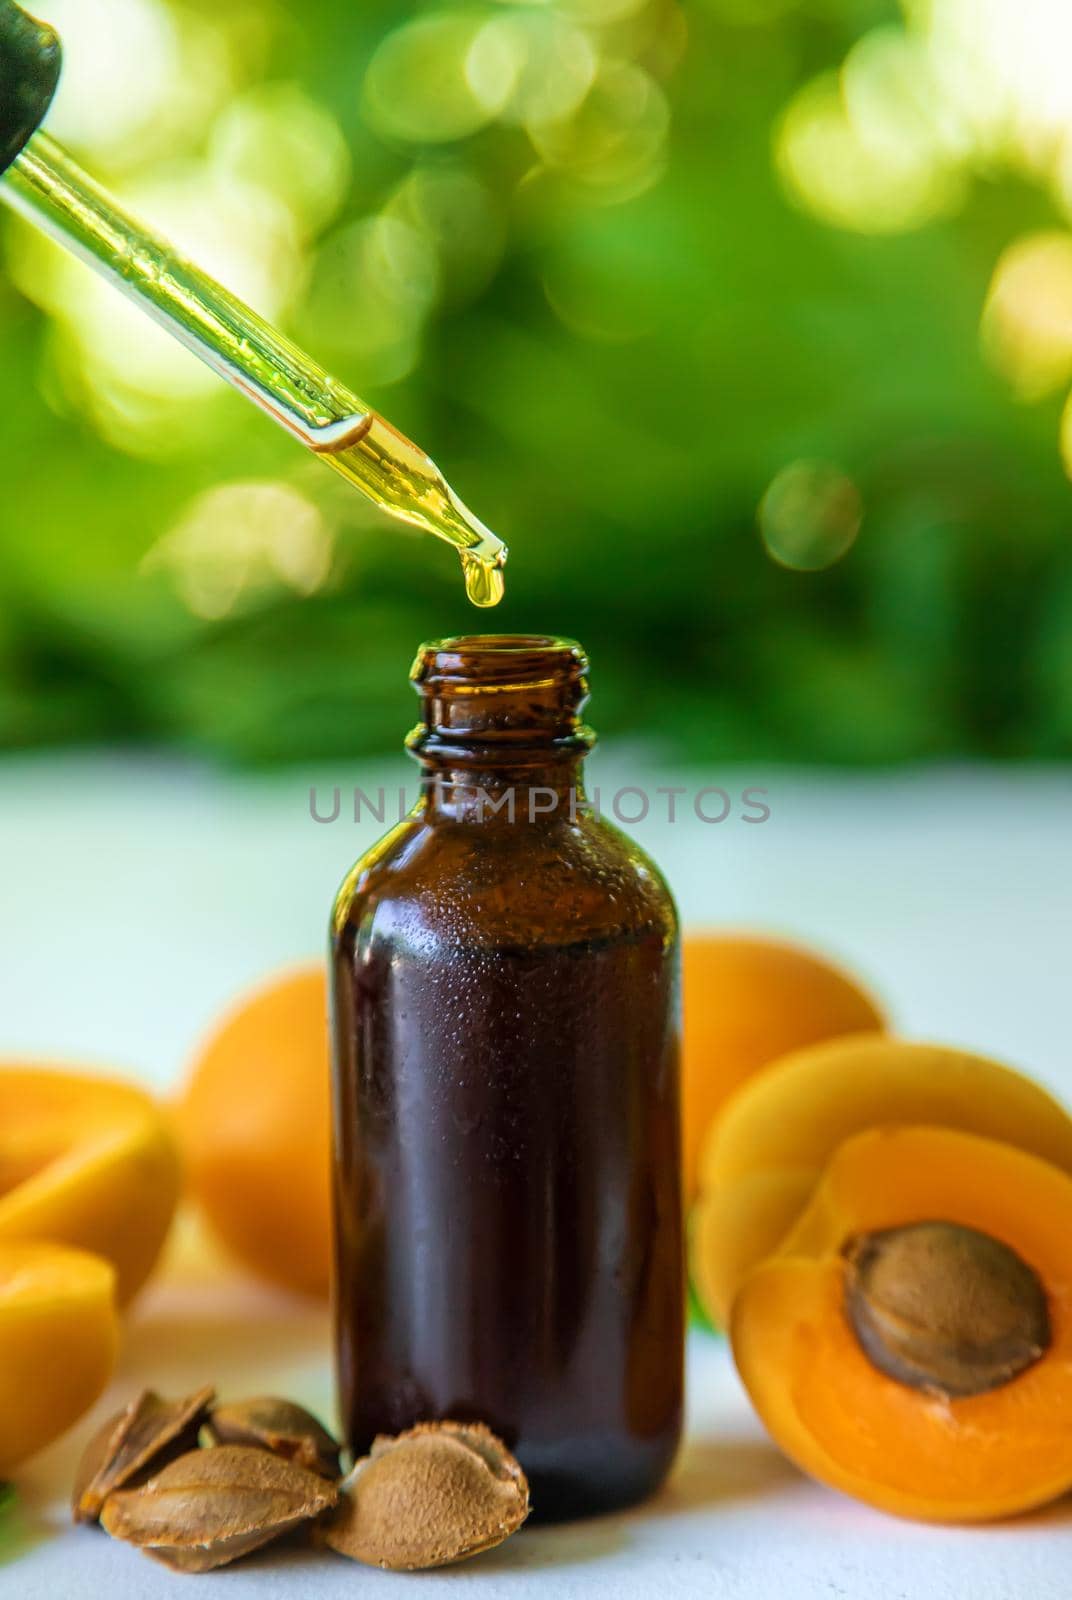 Apricot kernel oil in a bottle. Selective focus. Food.